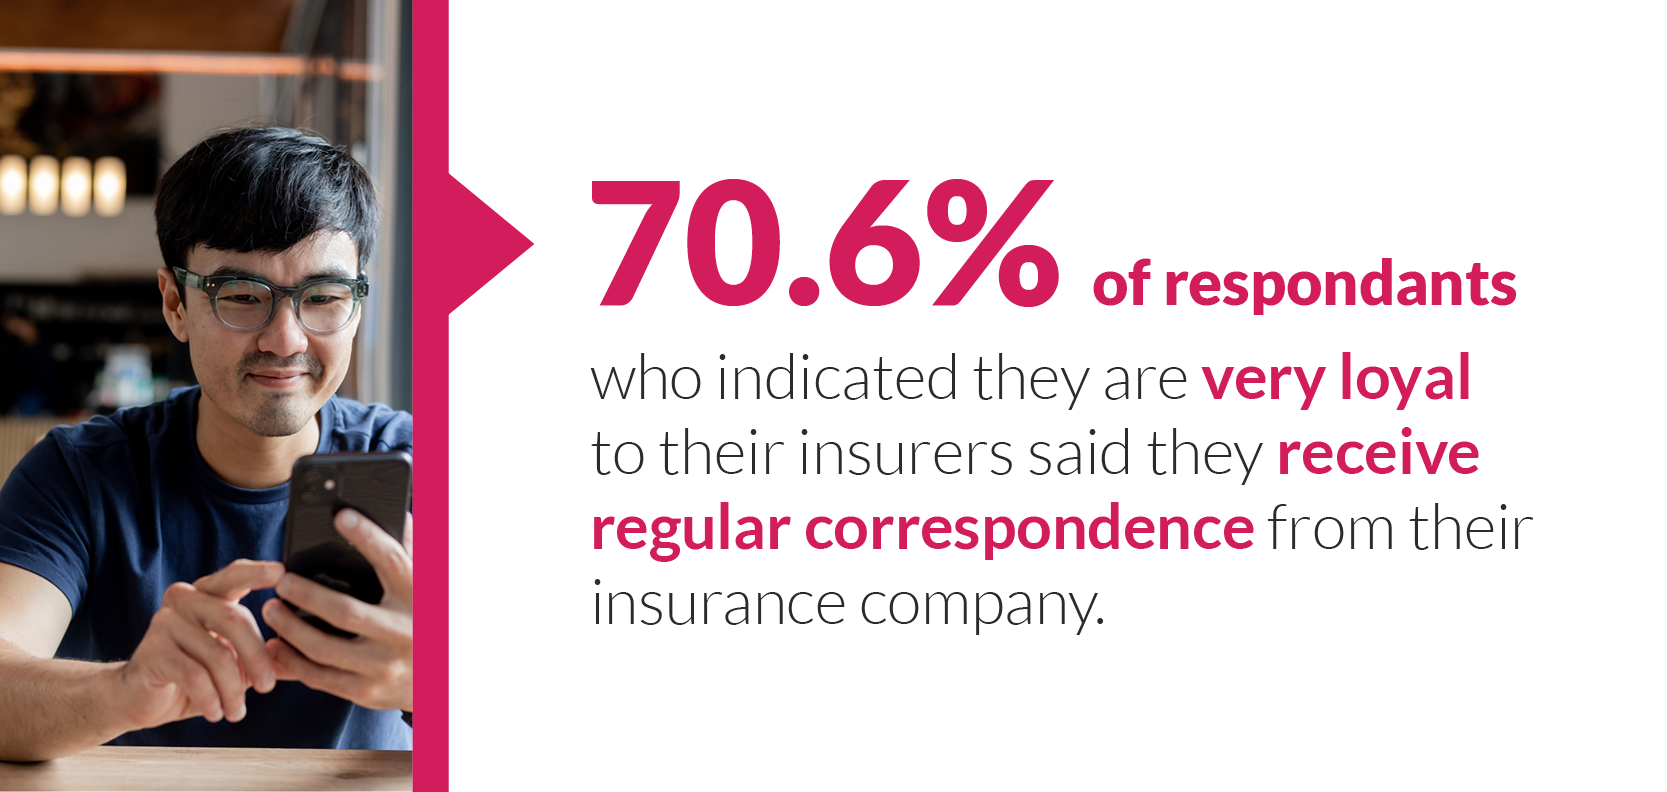 71% of respondents who indicated they are very loyal to their insurers said they receive regular corespondence from their insurance company